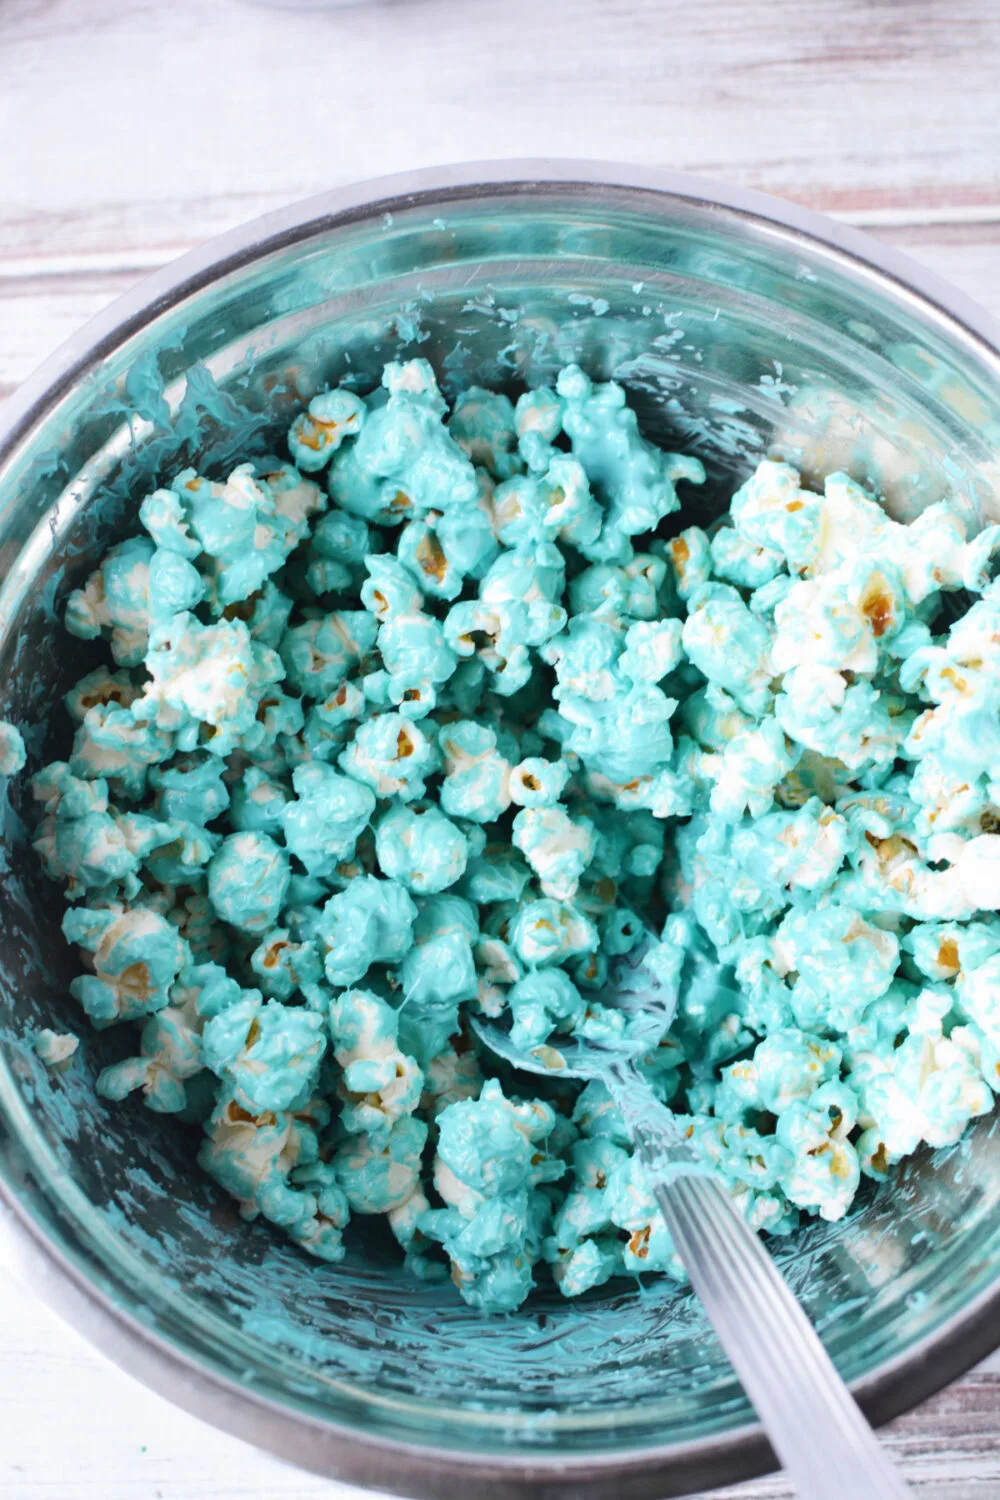 Popcorn coated with blue melted candy.